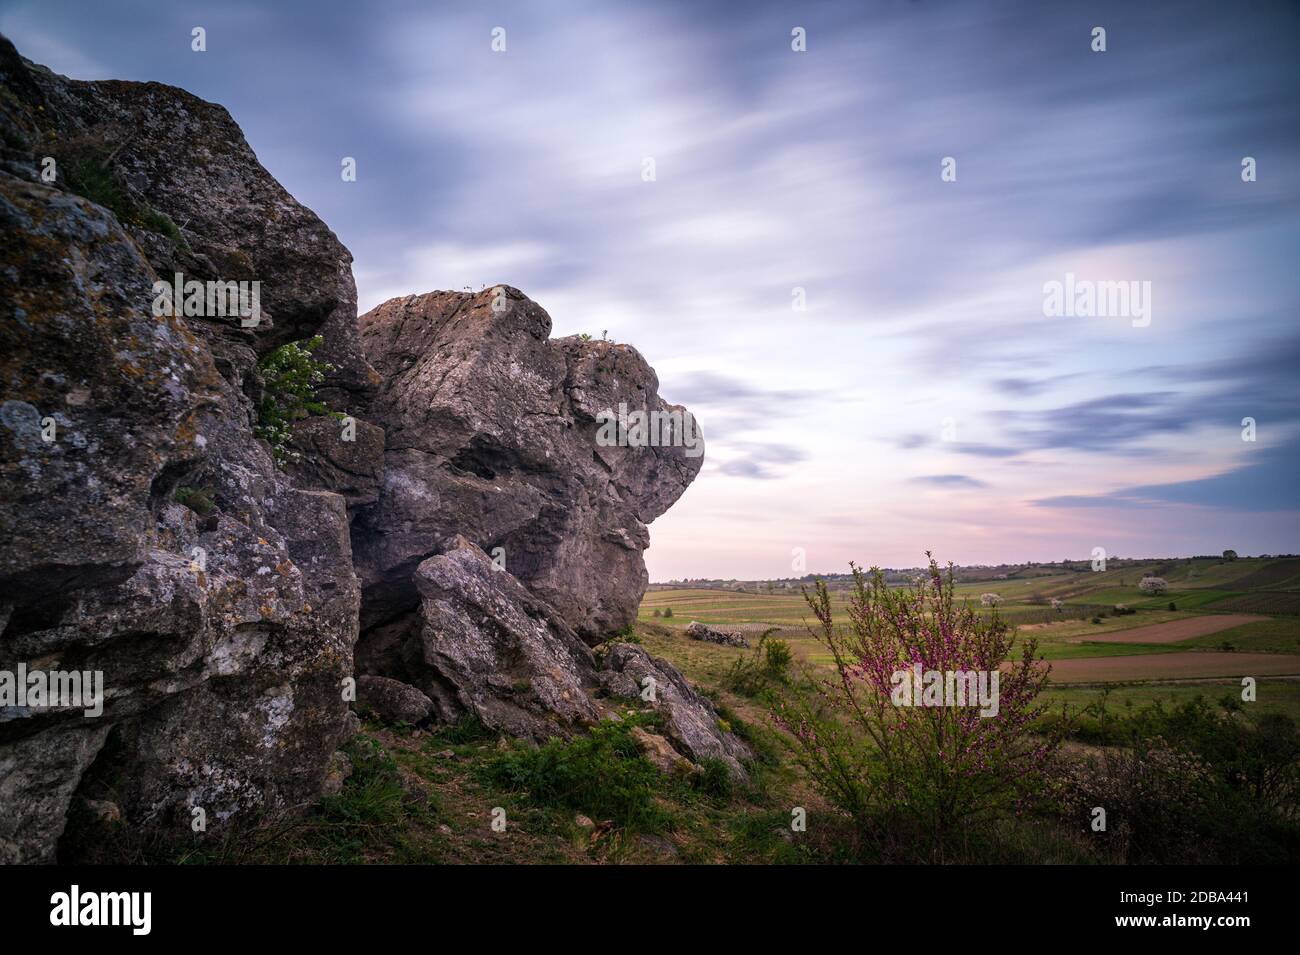 Landscape with boulder at sunrise with blured clouds Stock Photo